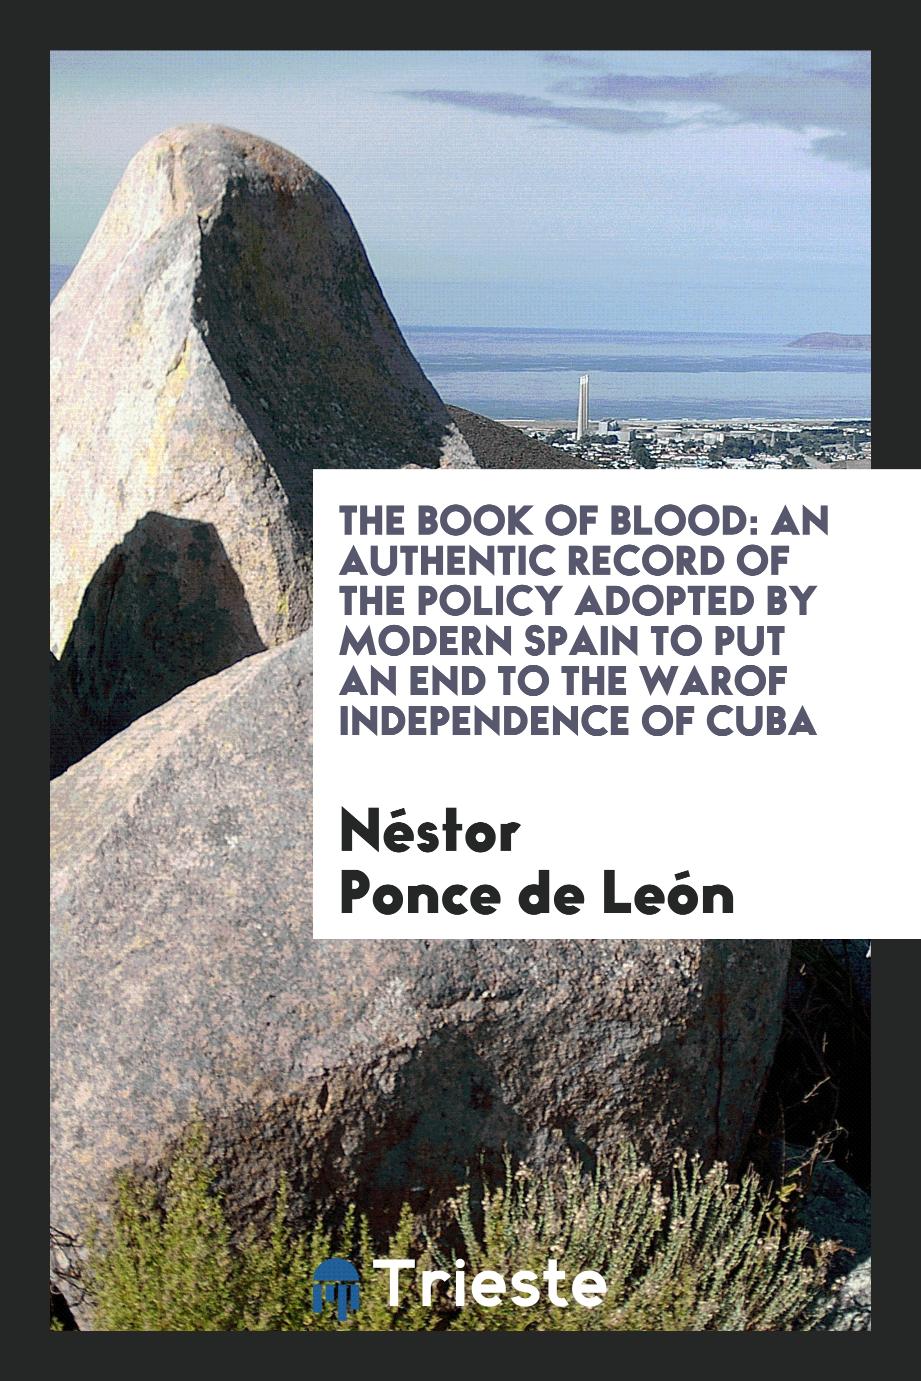 The Book of Blood: An Authentic Record of the Policy Adopted by Modern Spain to Put an End to the warof independence of Cuba